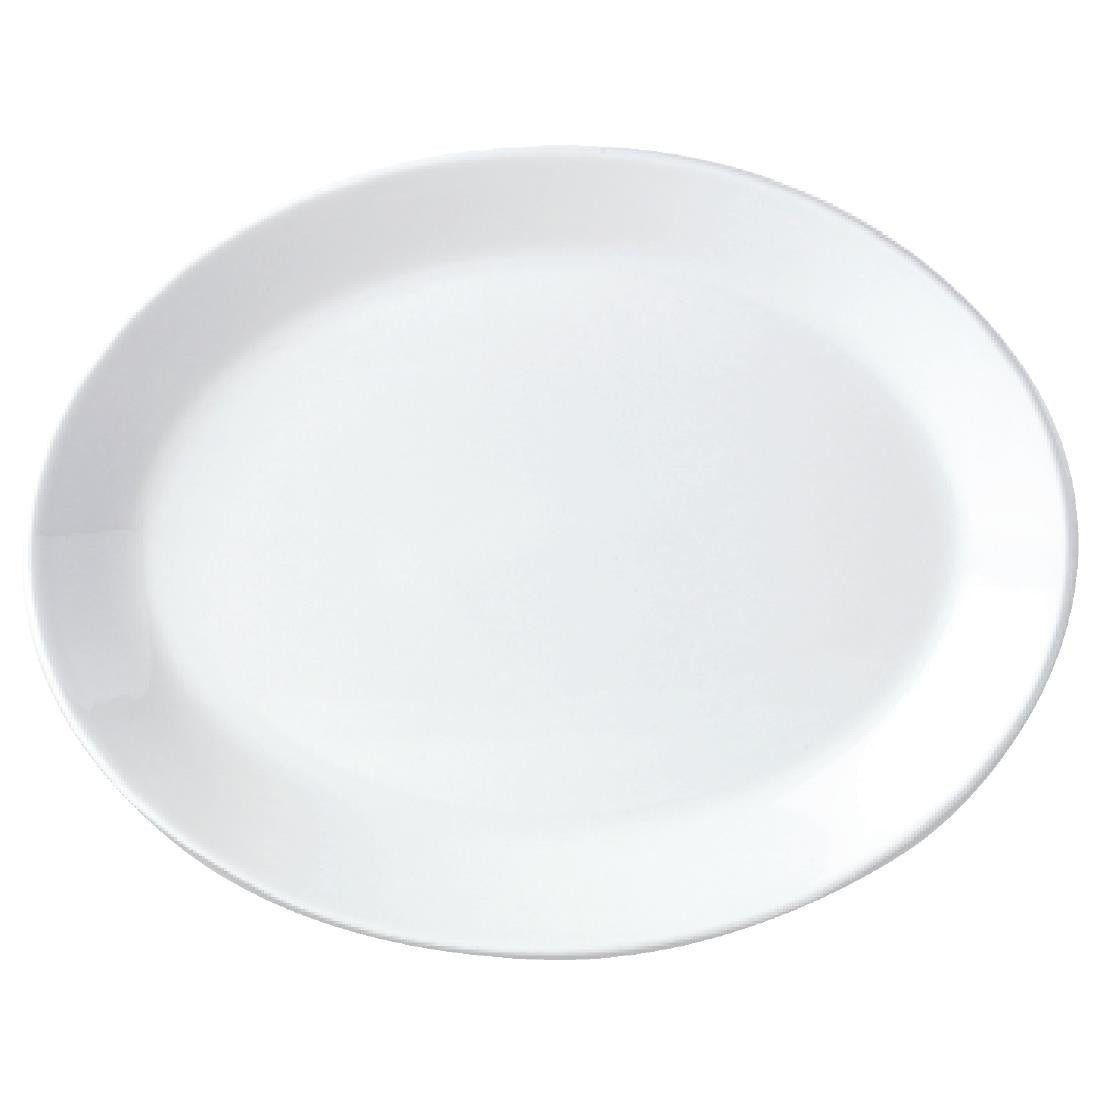 Steelite Simplicity White Oval Coupe Dishes 305mm (Pack of 12)